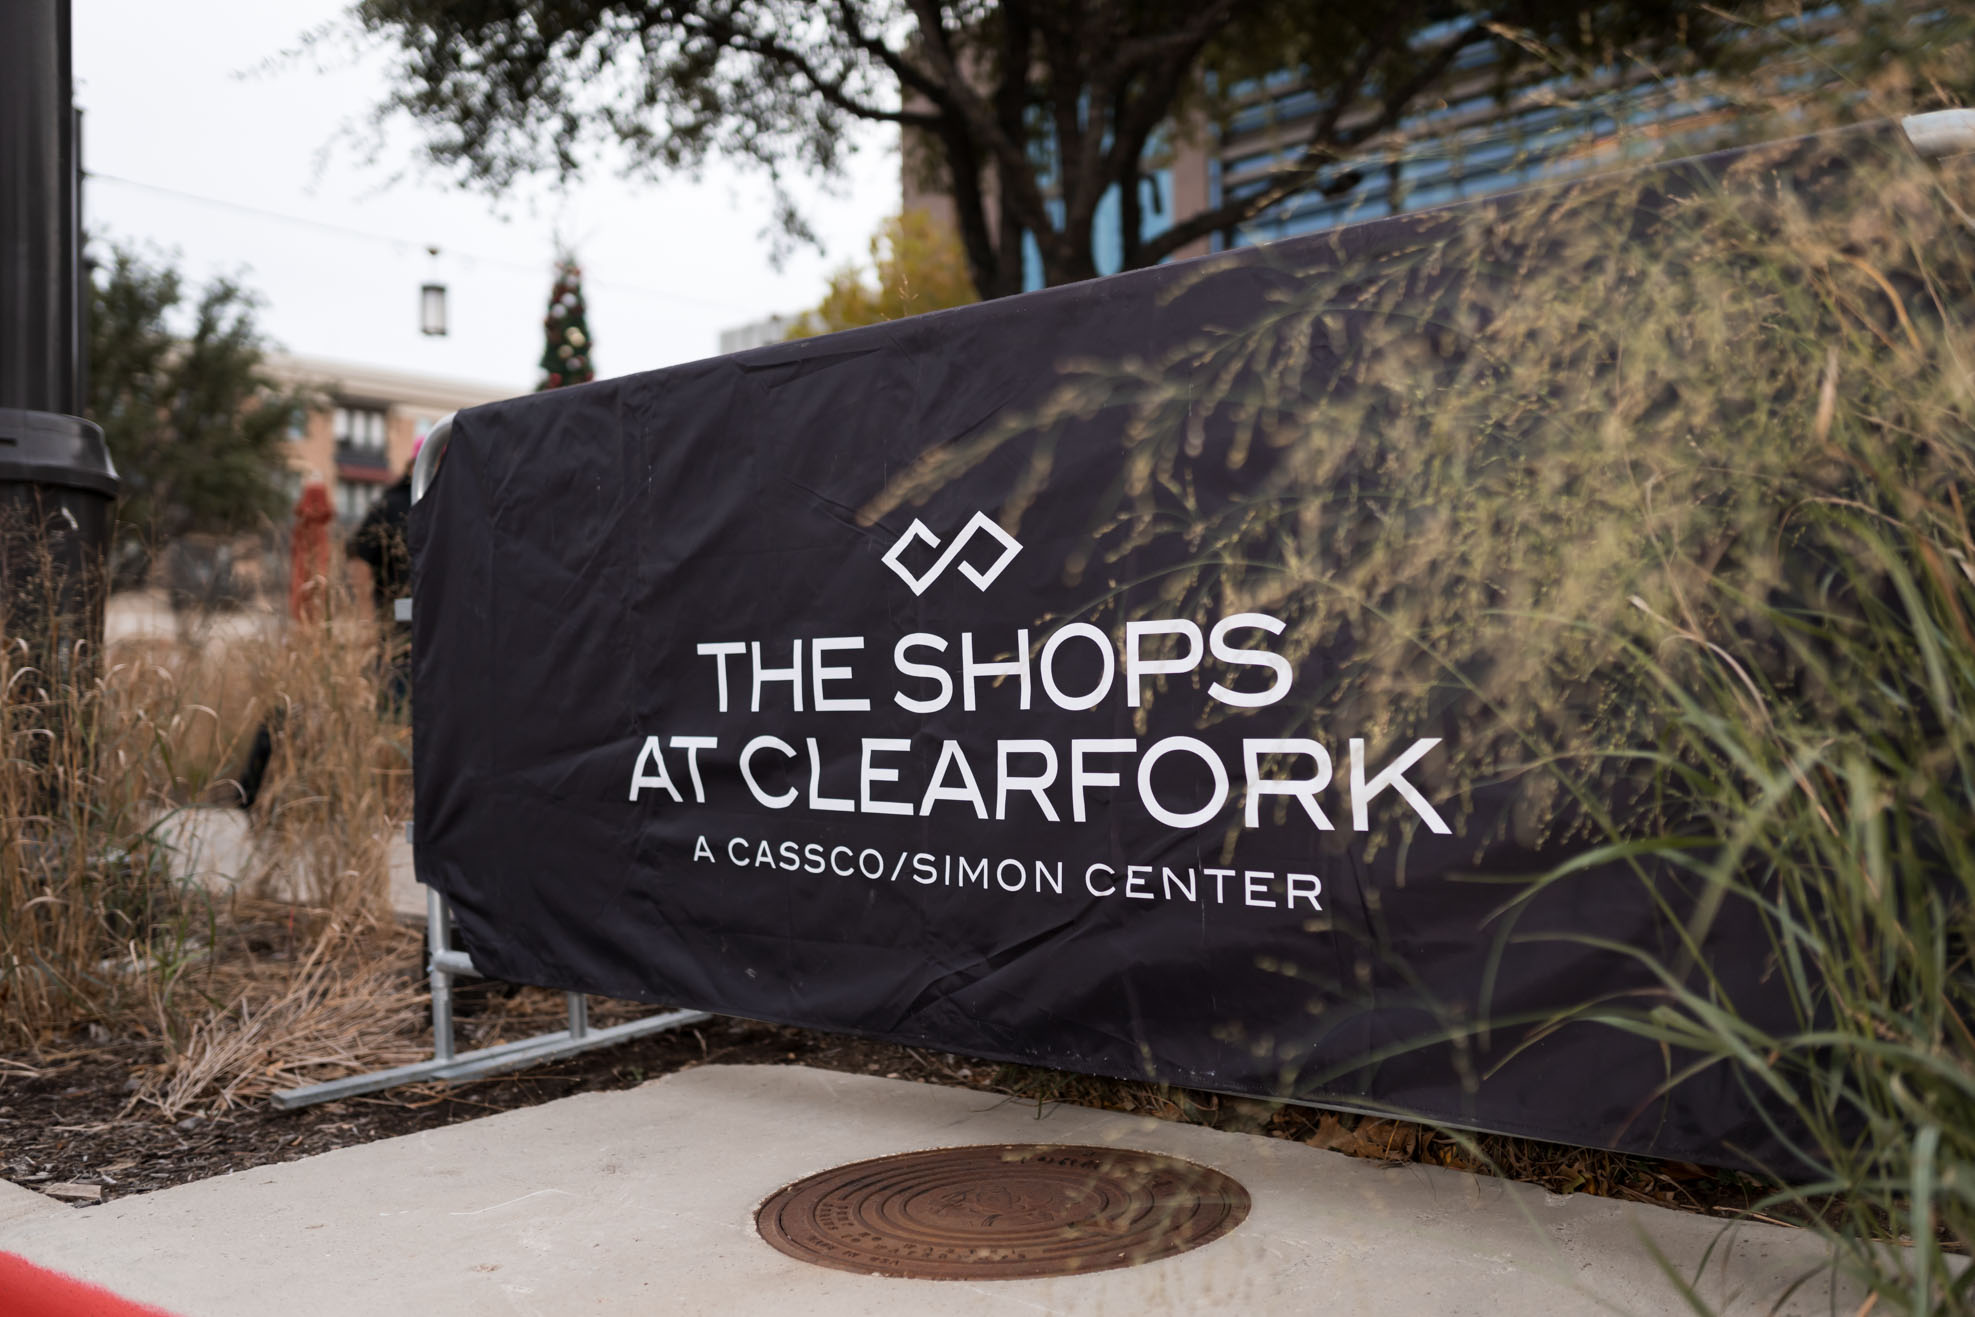 About Clearfork